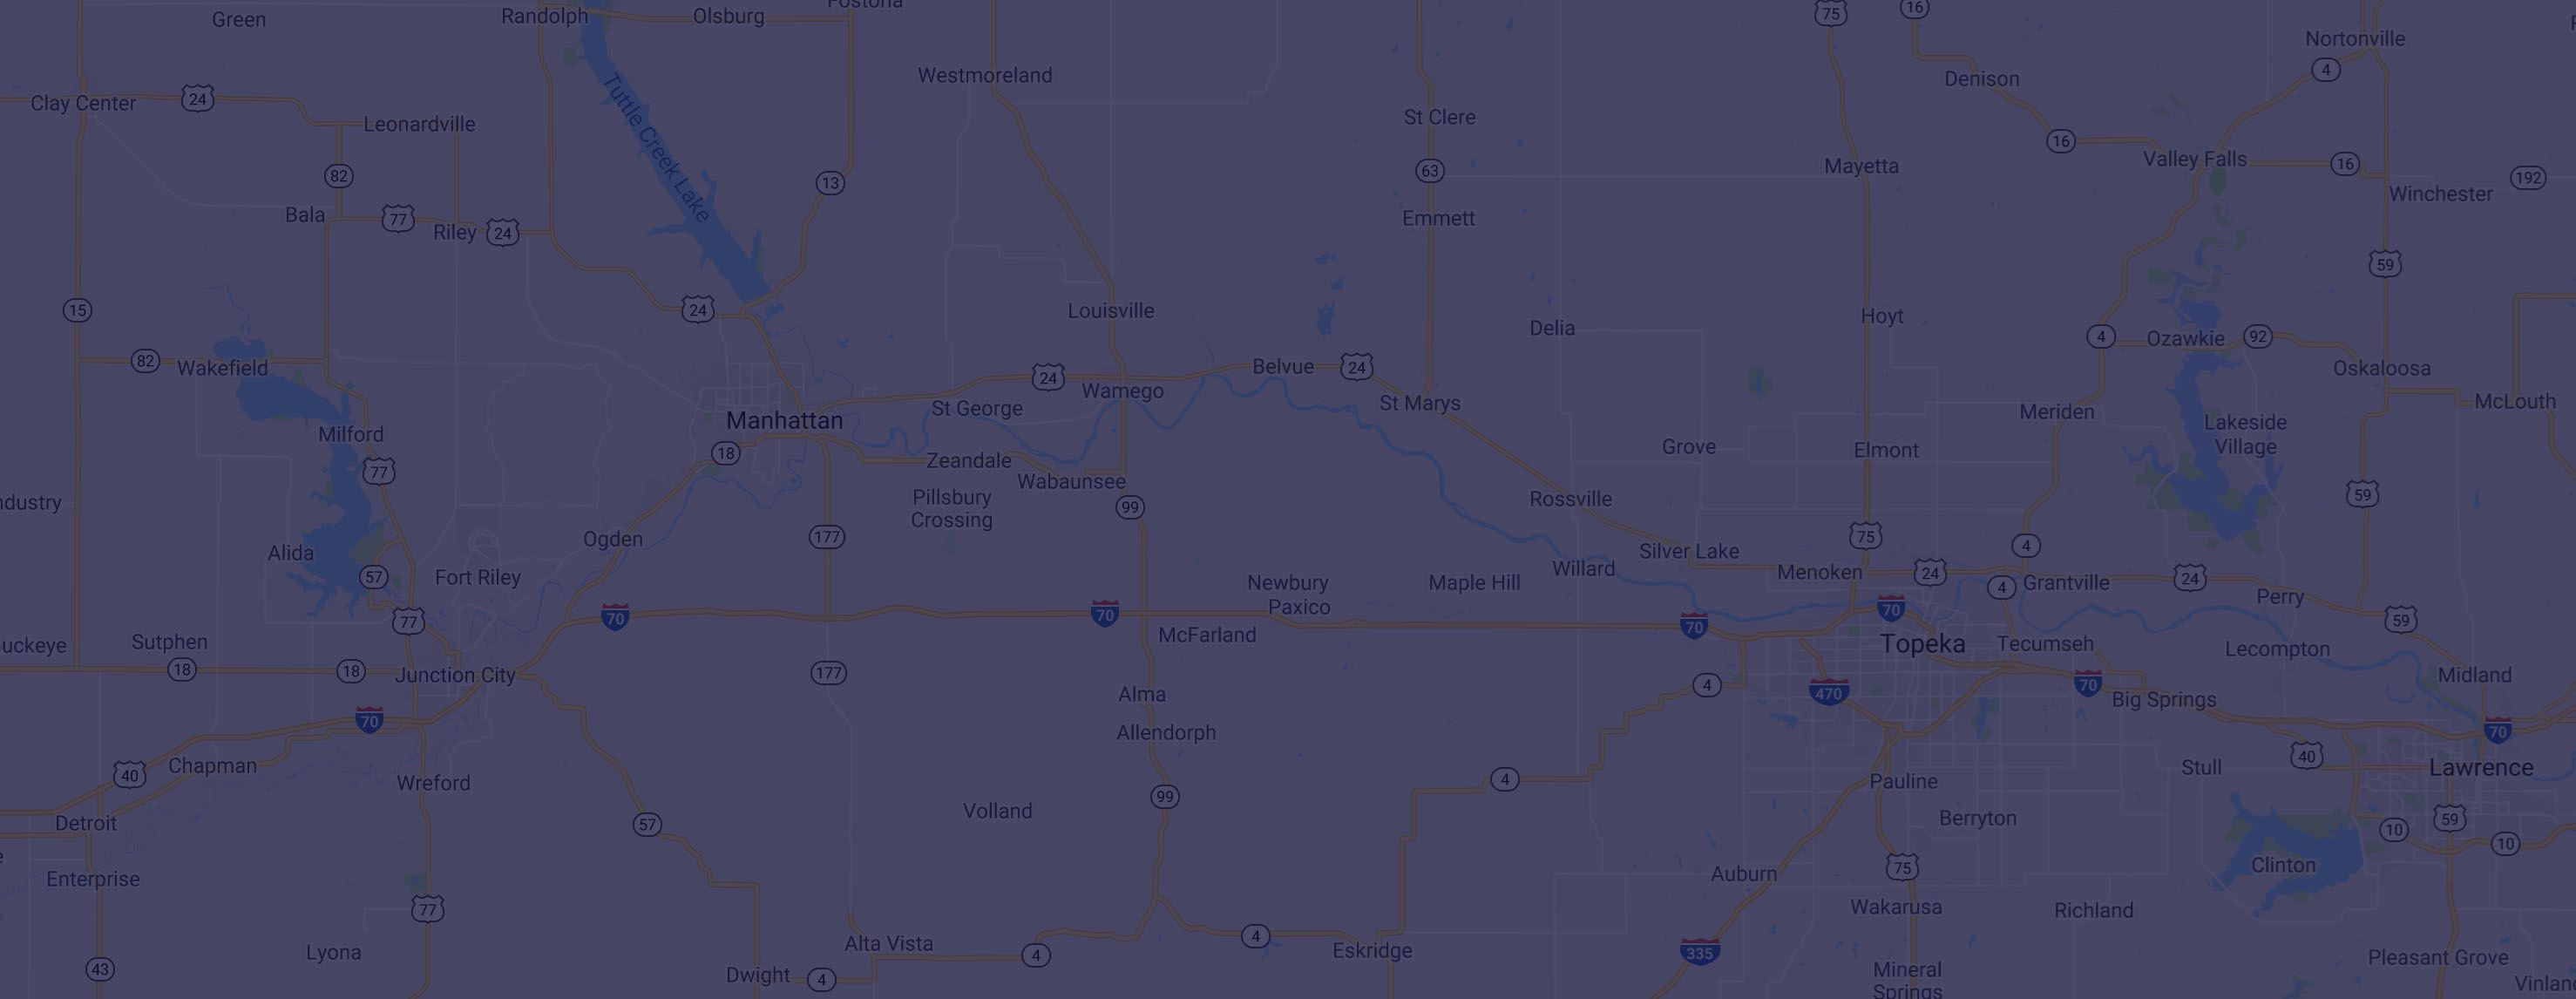 Map of Kansas from Google Maps